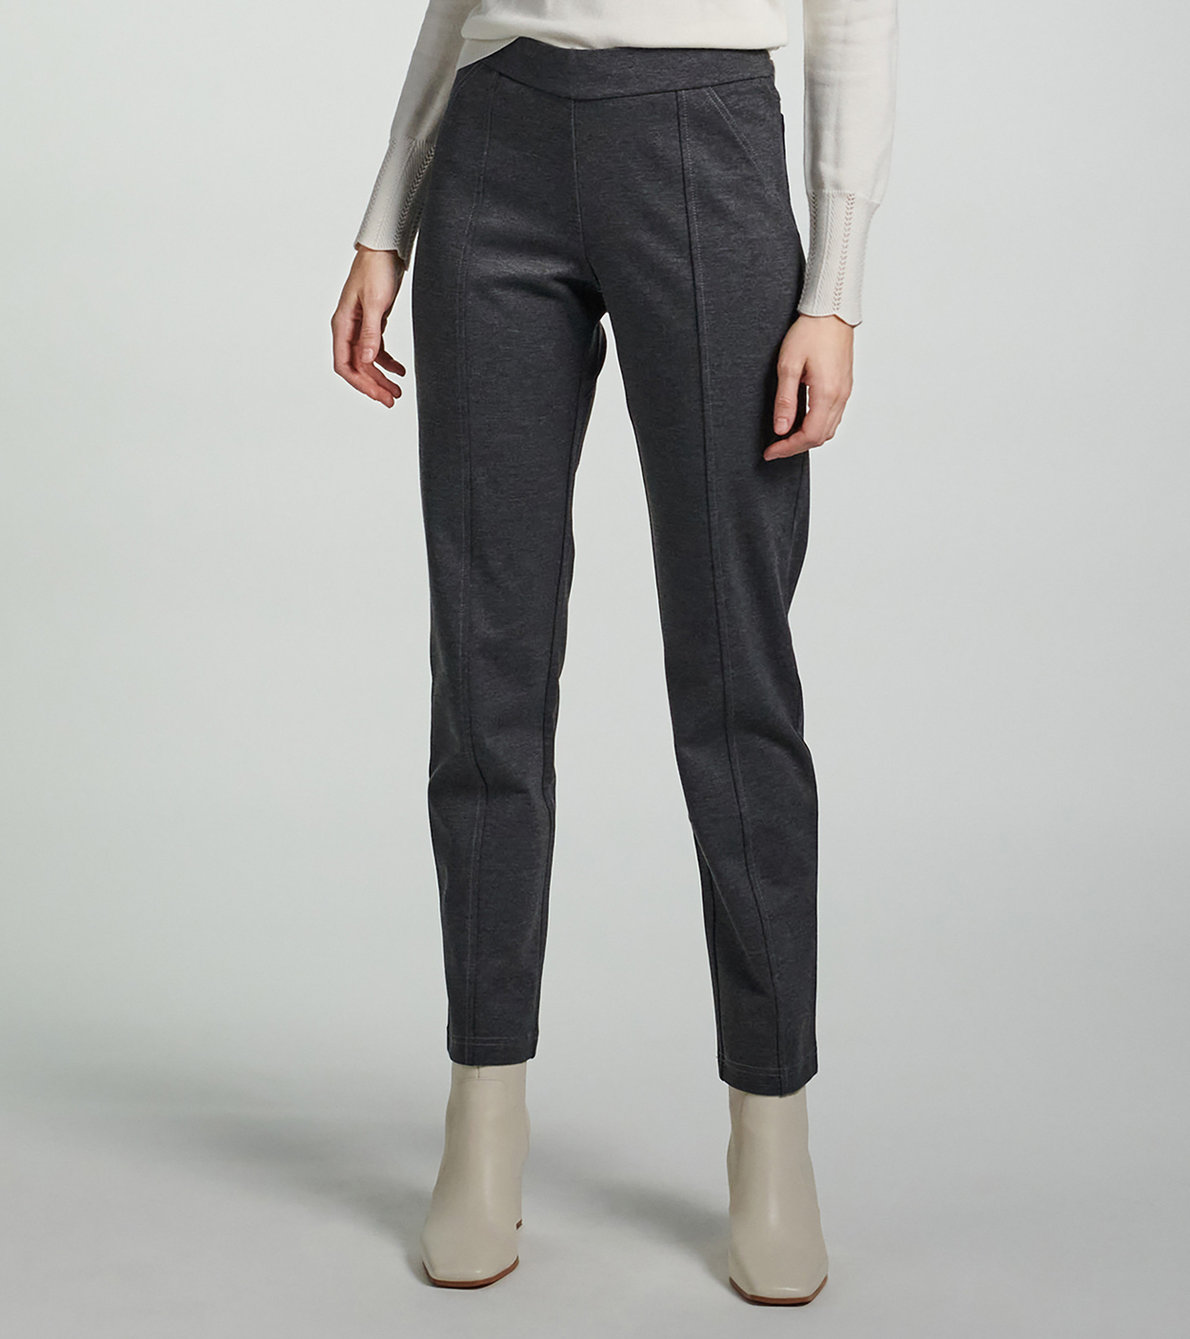 View larger image of Kate Ponte Pants - Charcoal